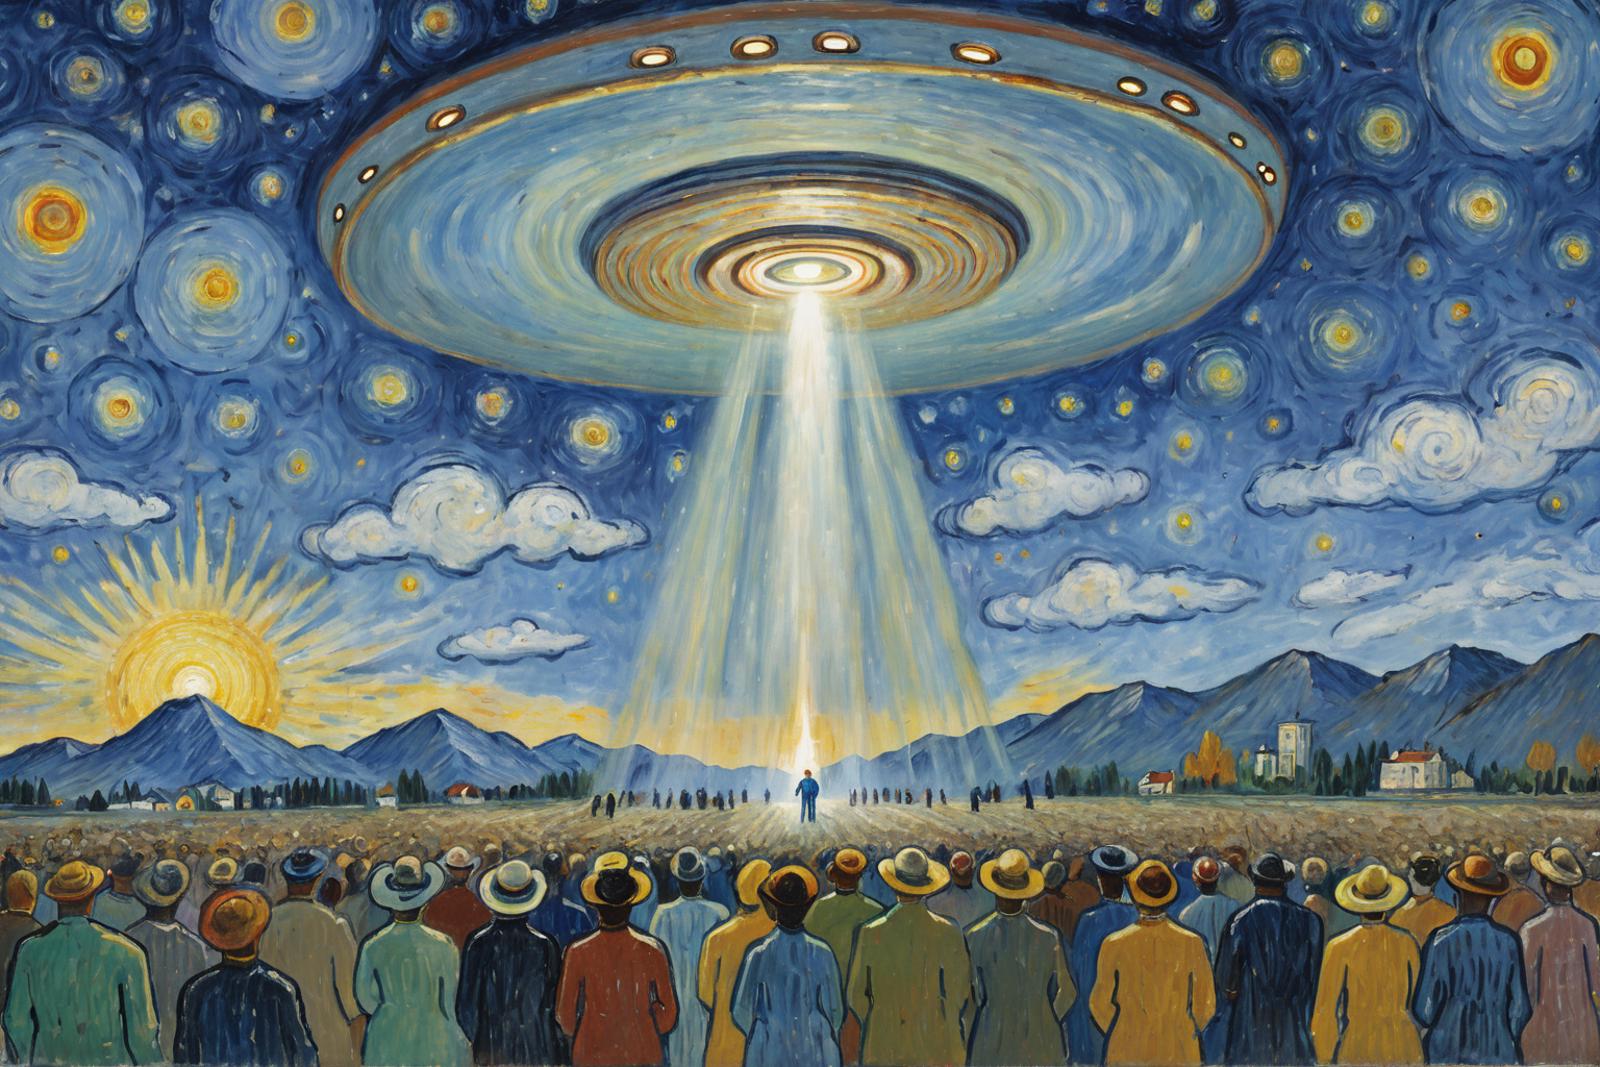 A painting of a man standing in front of a crowd as a UFO descends with a beam of light.